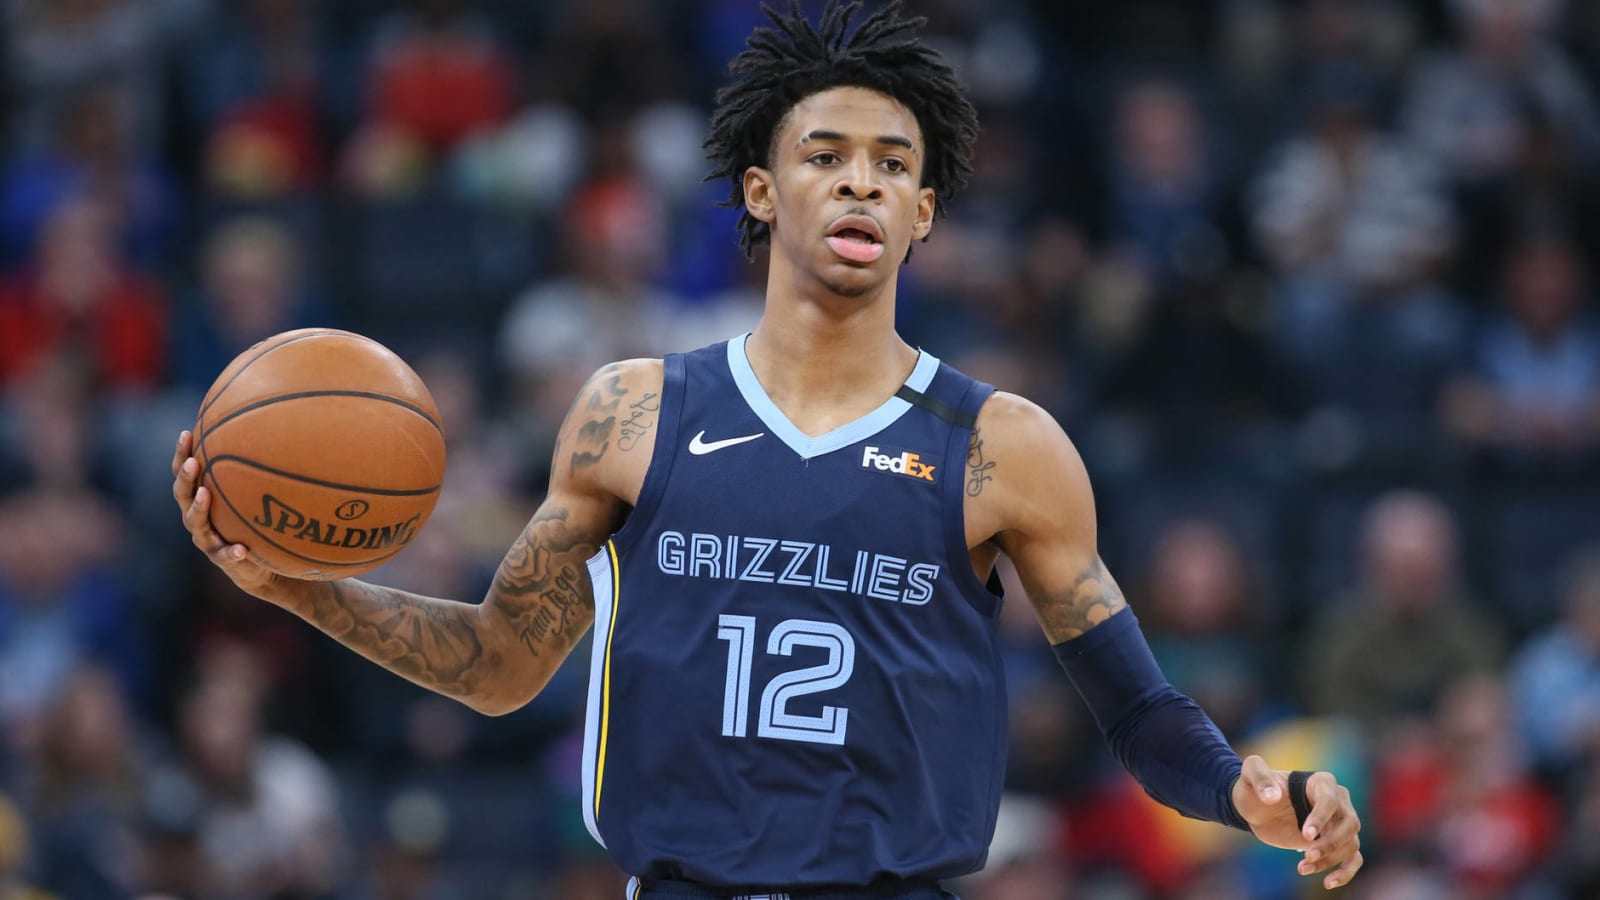 Each NBA team's most impressive rookie for 2019-20